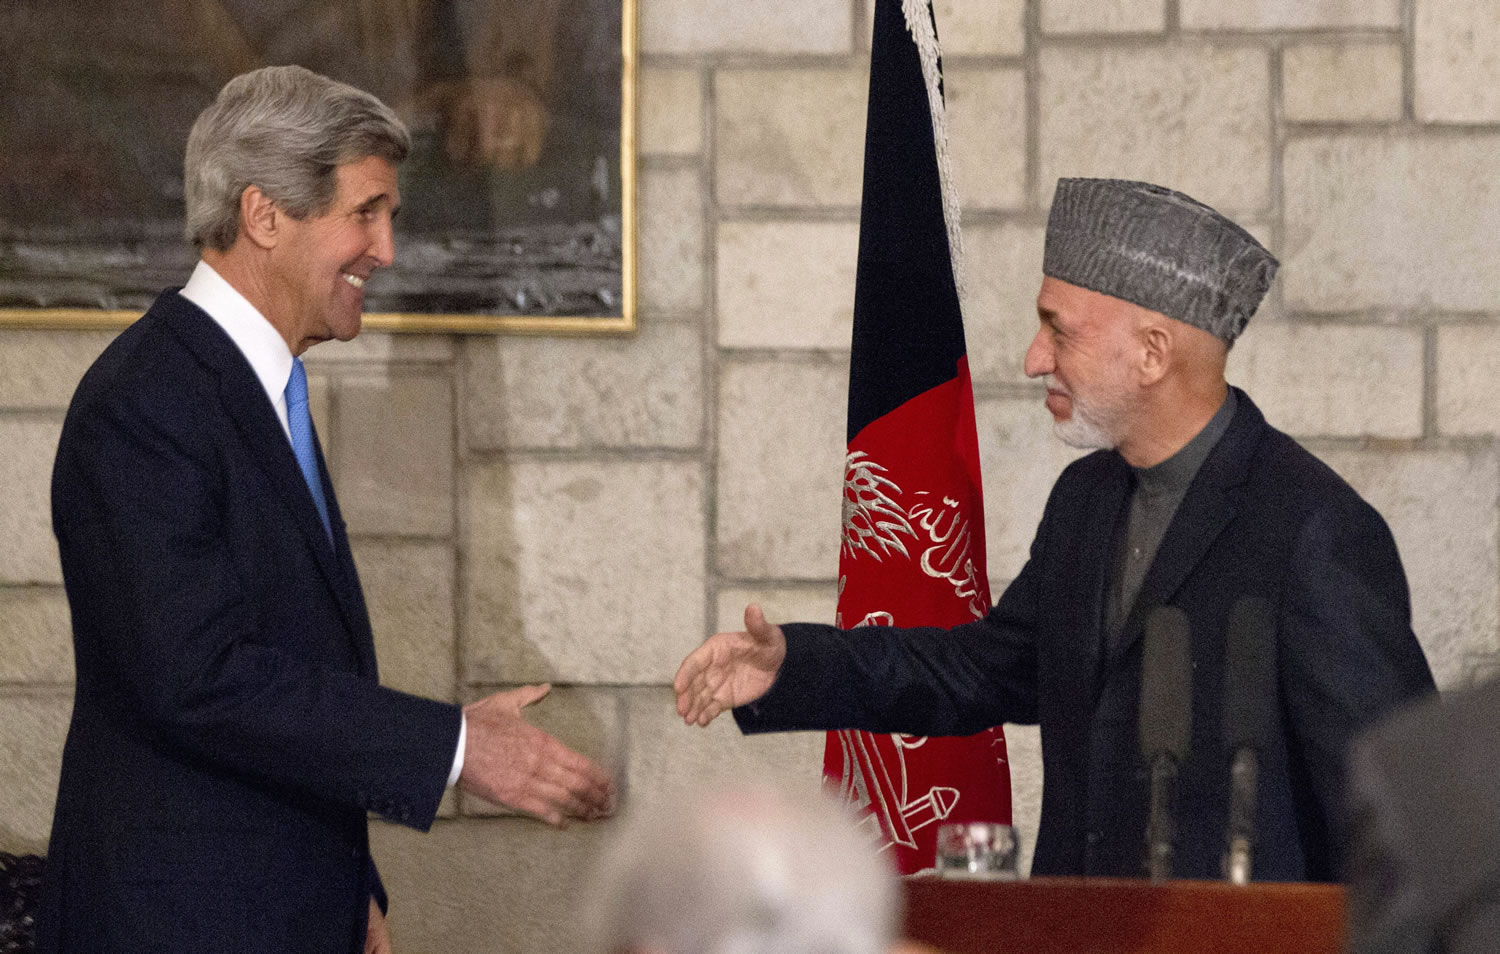 Secretary of State John Kerry shakes hands with Afghan President Hamid Karzai at the end of their joint news conference at the Presidential Palace in Kabul on Monday.